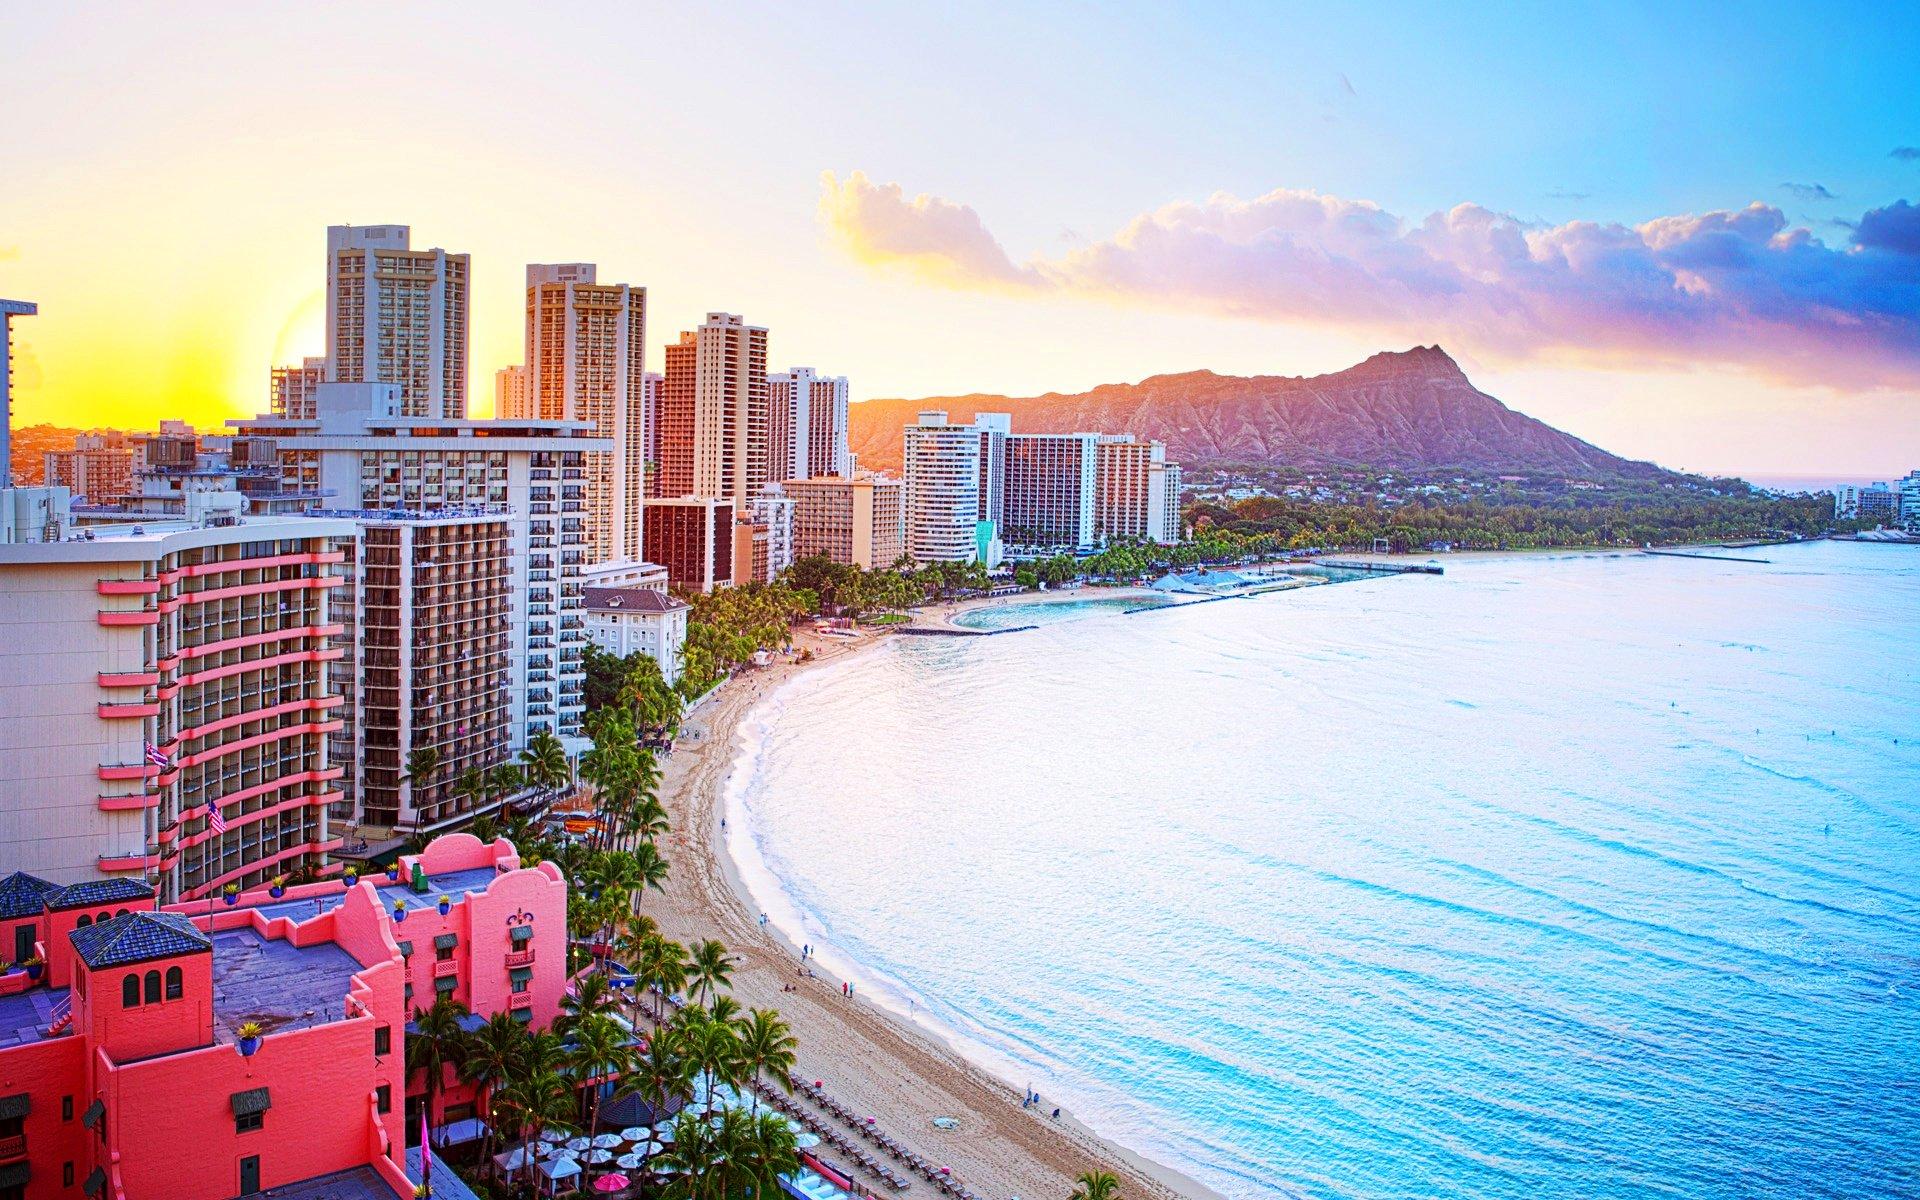 Free HD Hawaii Wallpaper For Download